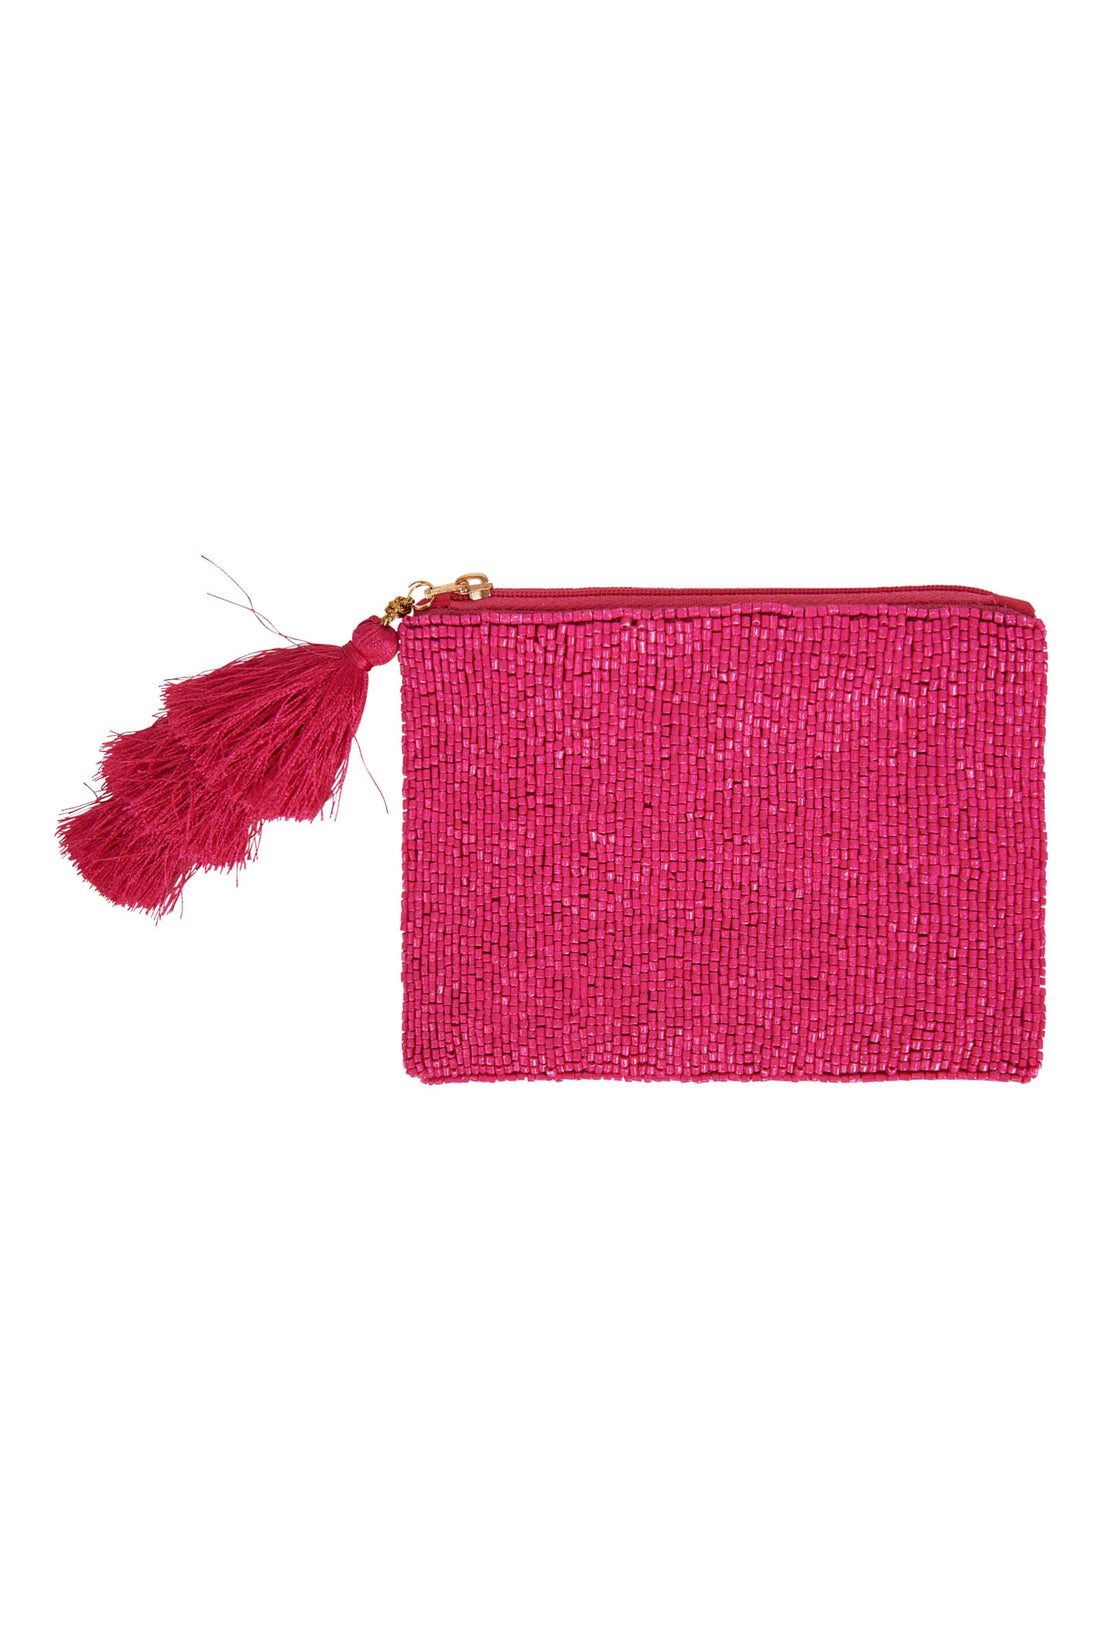 Eb&amp;Ive Flourish Pouch Candy Pink